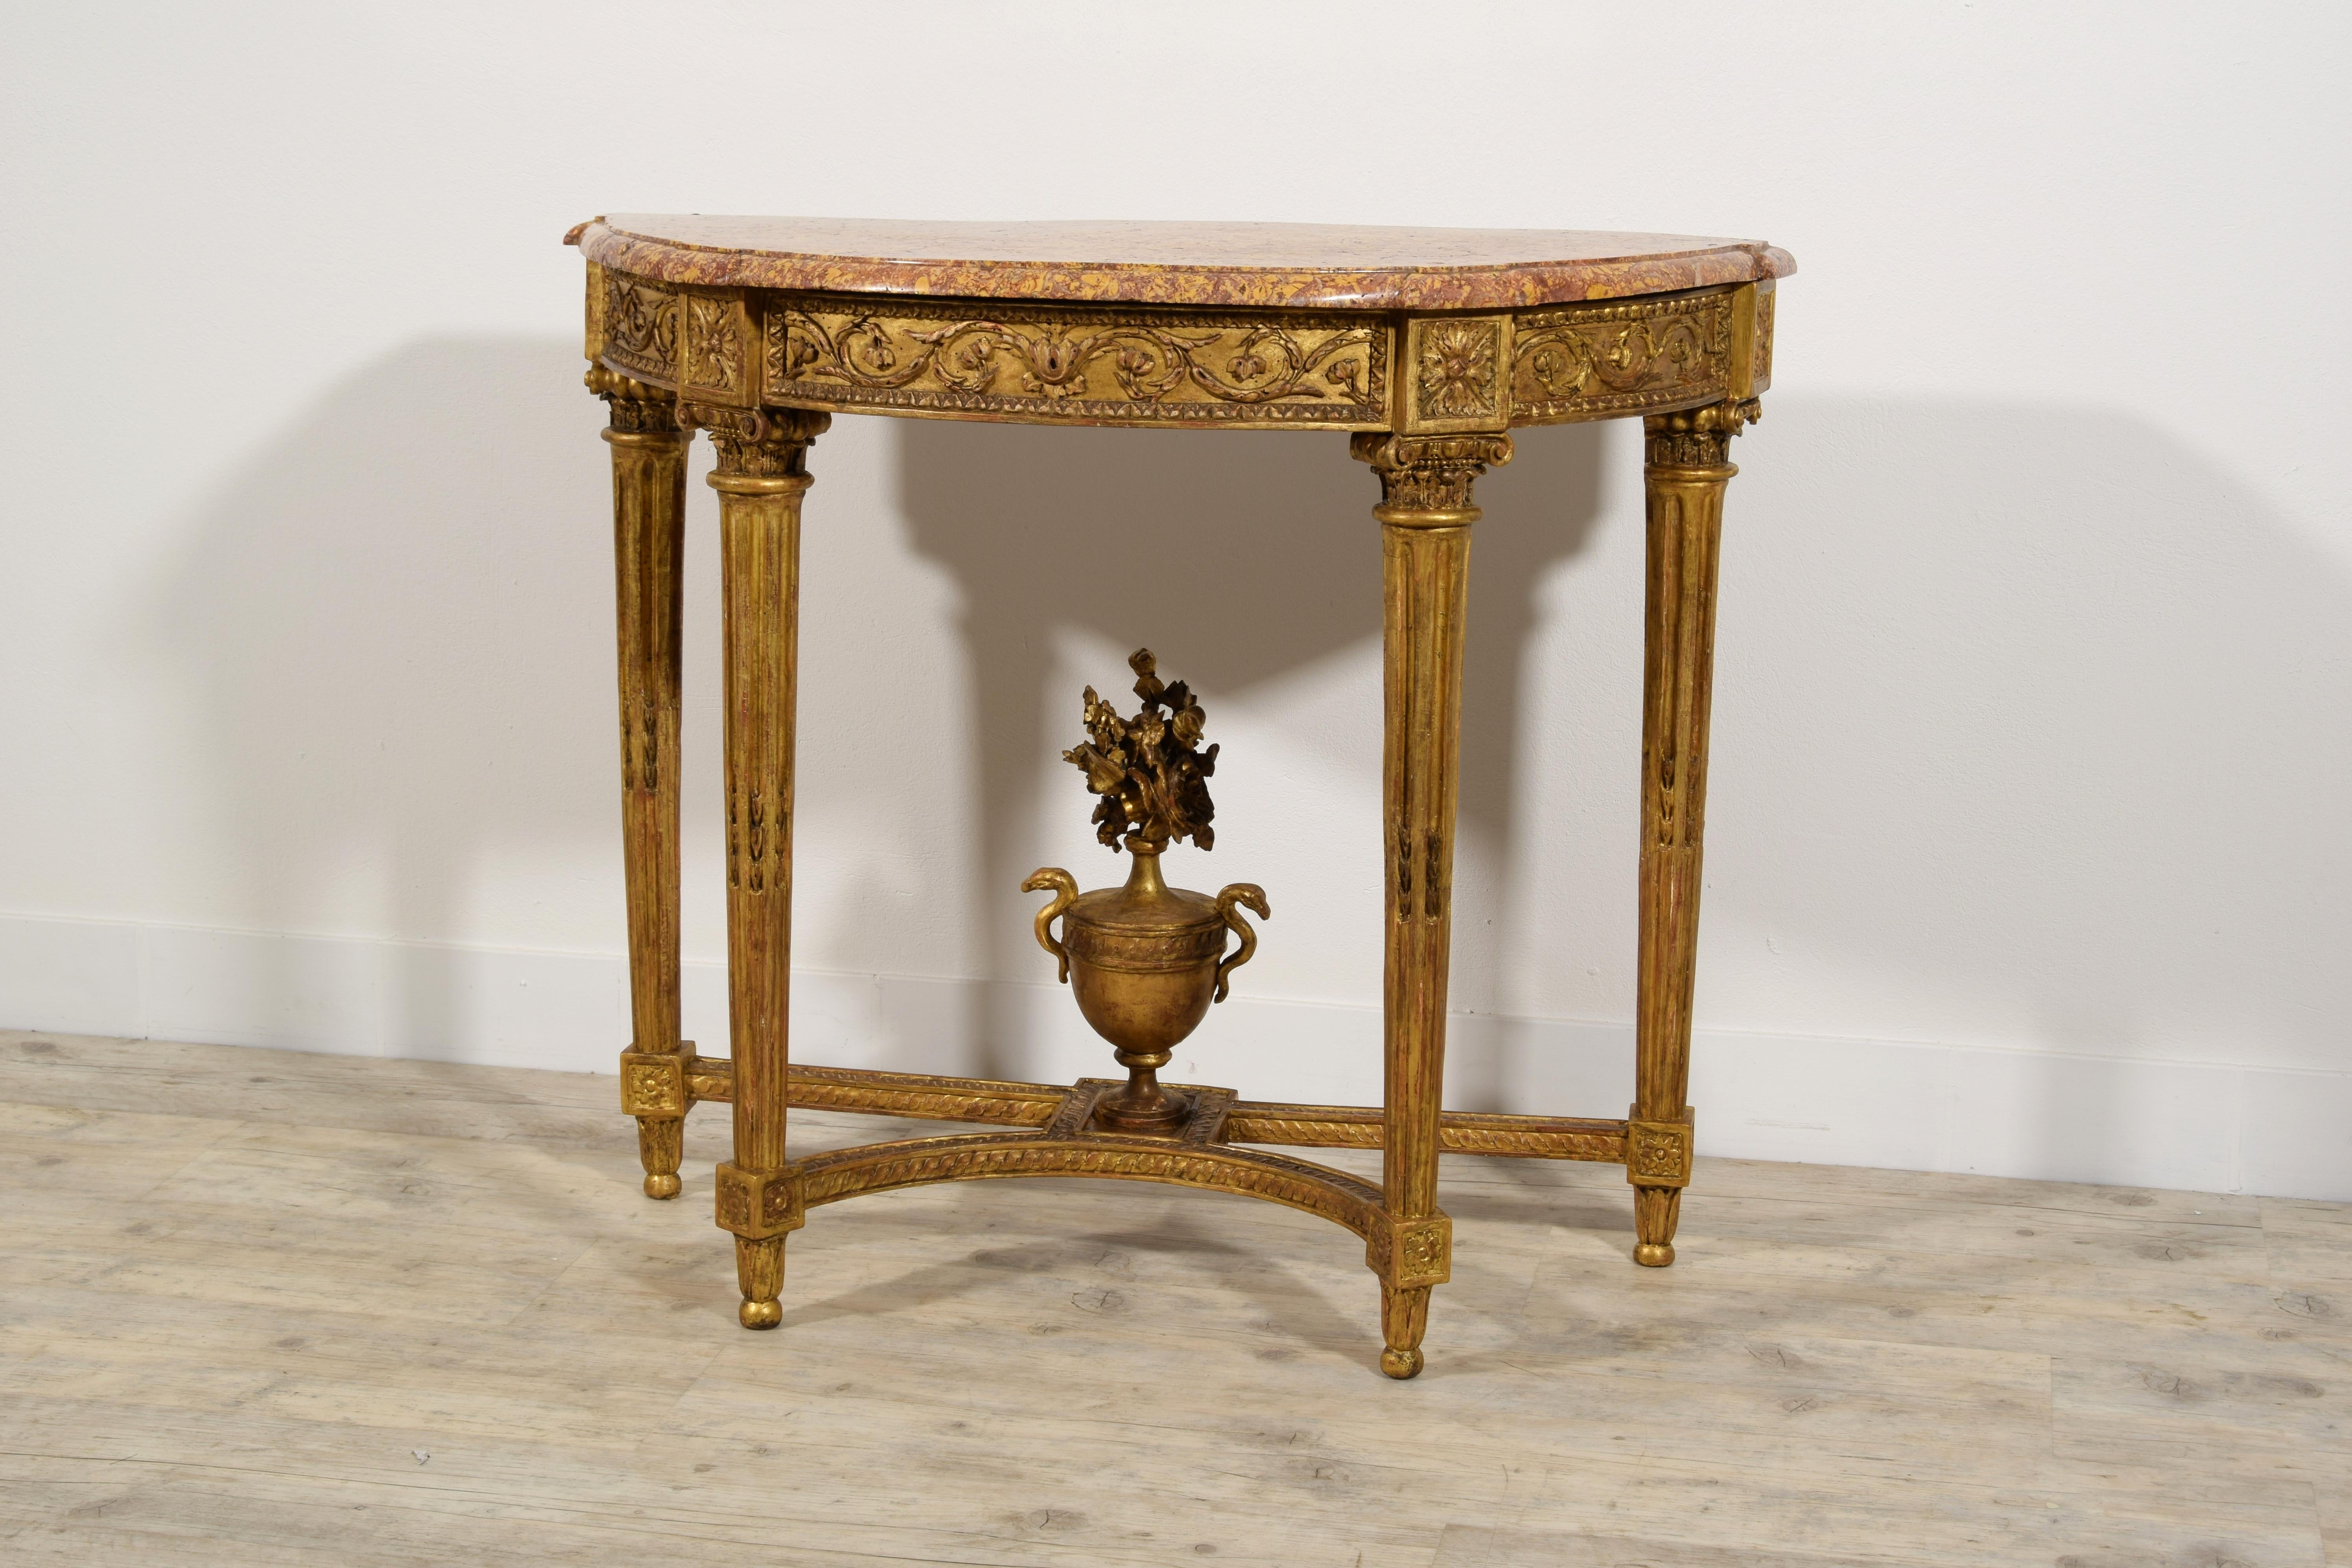 18th Century, French Louis XVI carved gilt wood console 

This elegant wooden console finely carved and golden, fully represents the taste that was established in France in the second half of the eighteenth century, in the Louis XVI era.
The